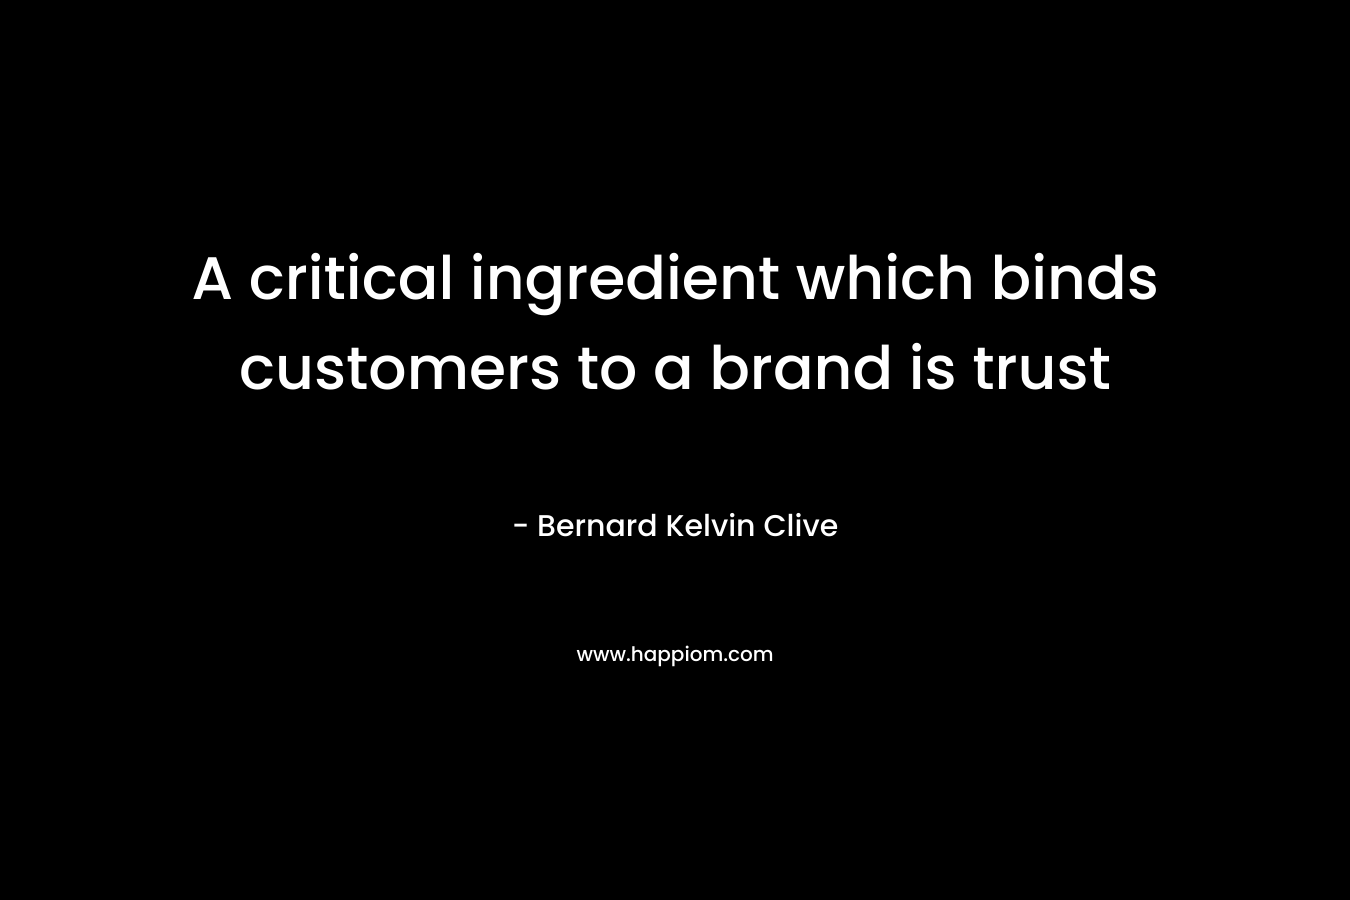 A critical ingredient which binds customers to a brand is trust